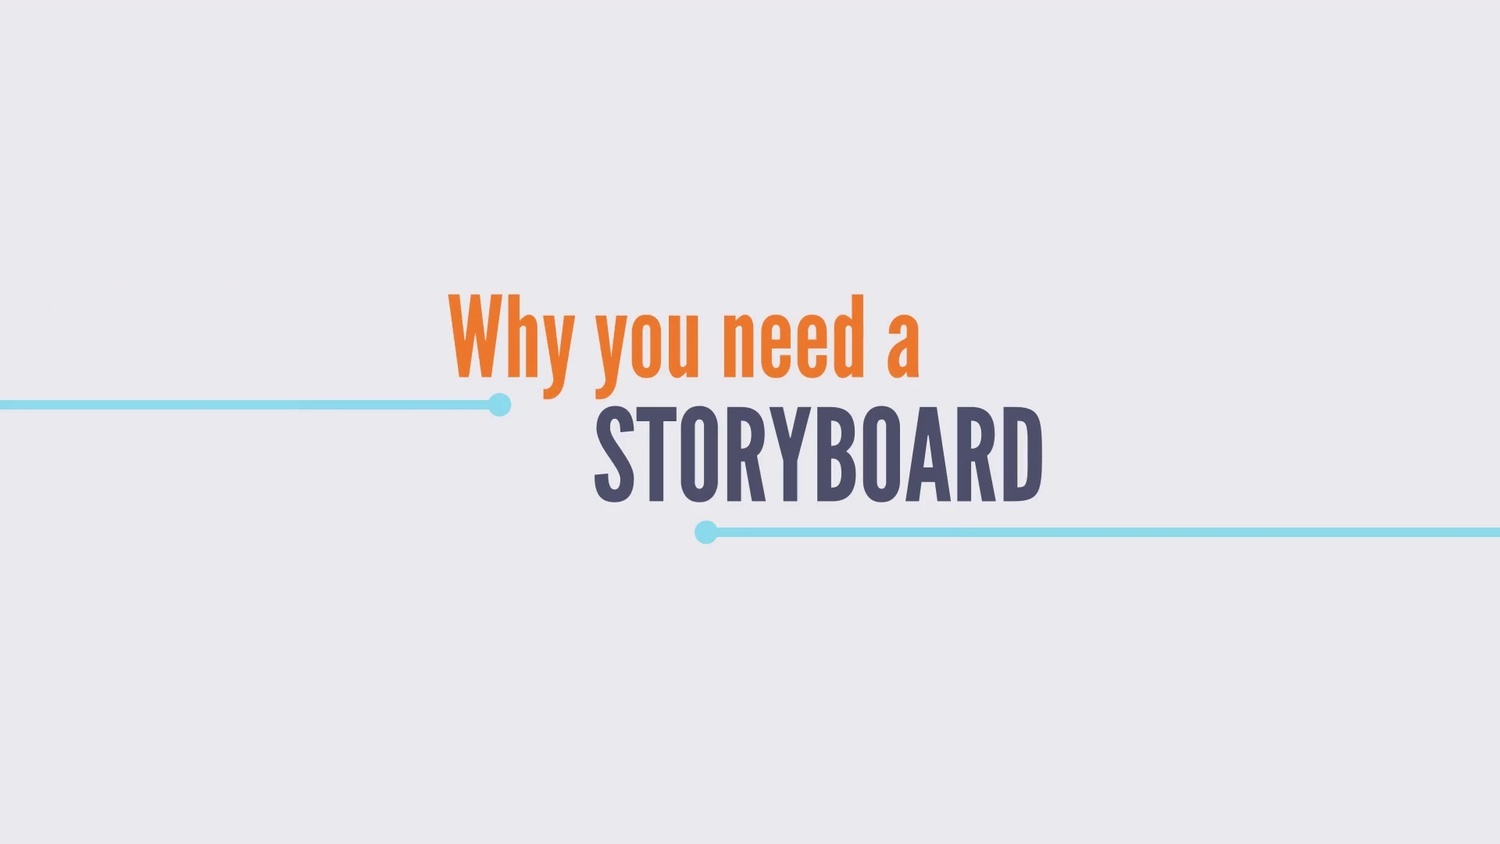 What Is A Storyboard And Why Do You Need One? (With Video)